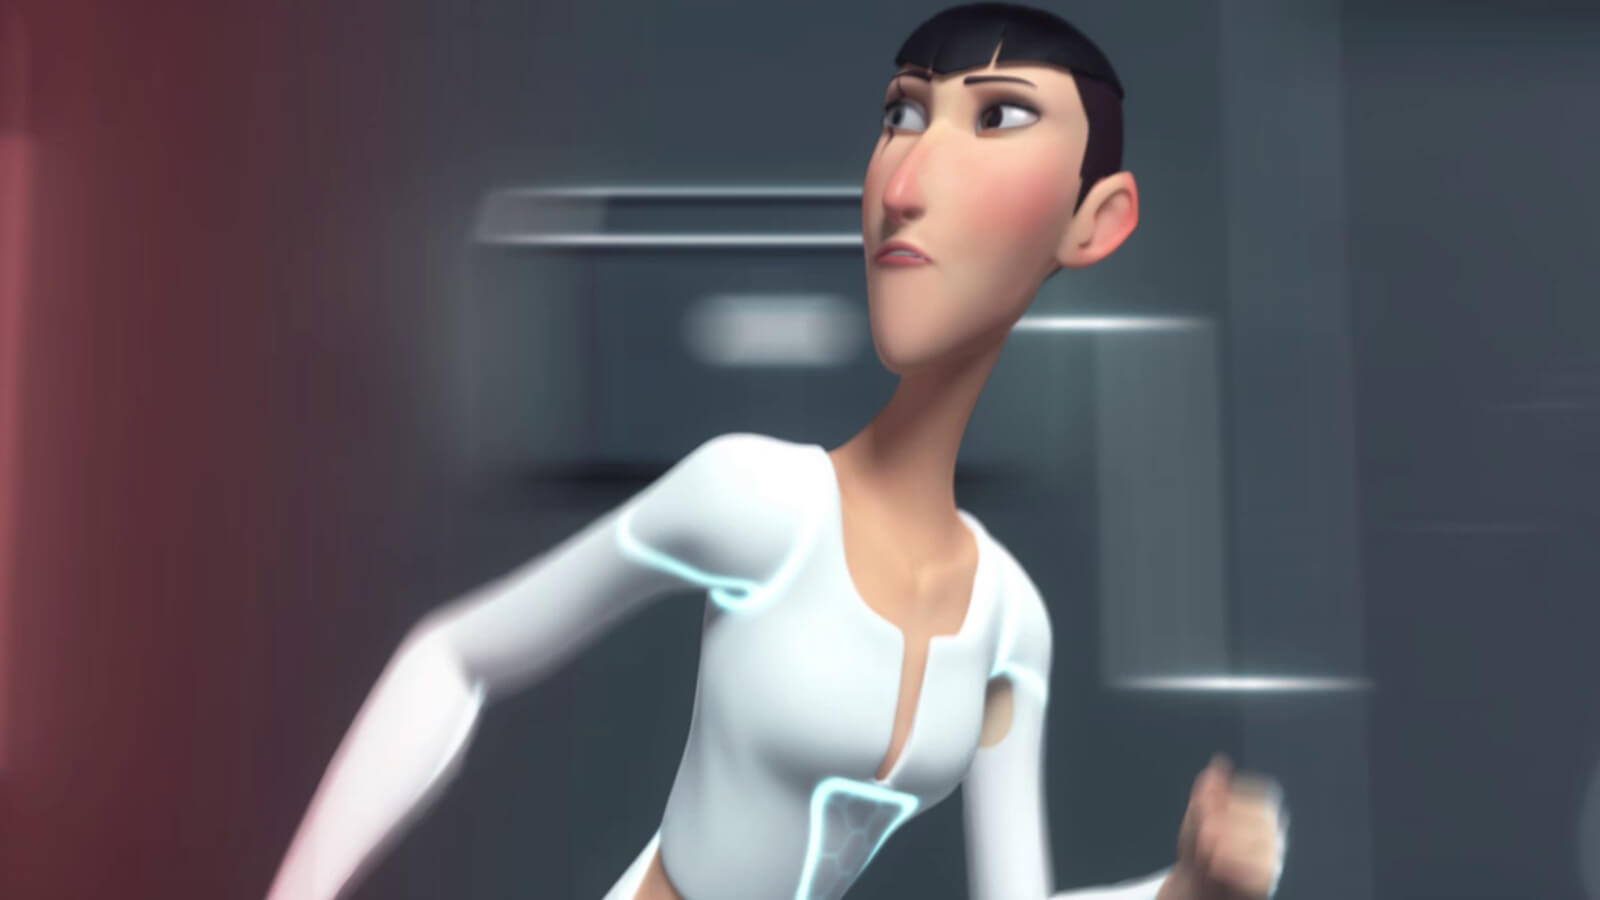 A tall, thin woman with a scar over her eye with futuristic white clothing runs away, looking behind her shoulder